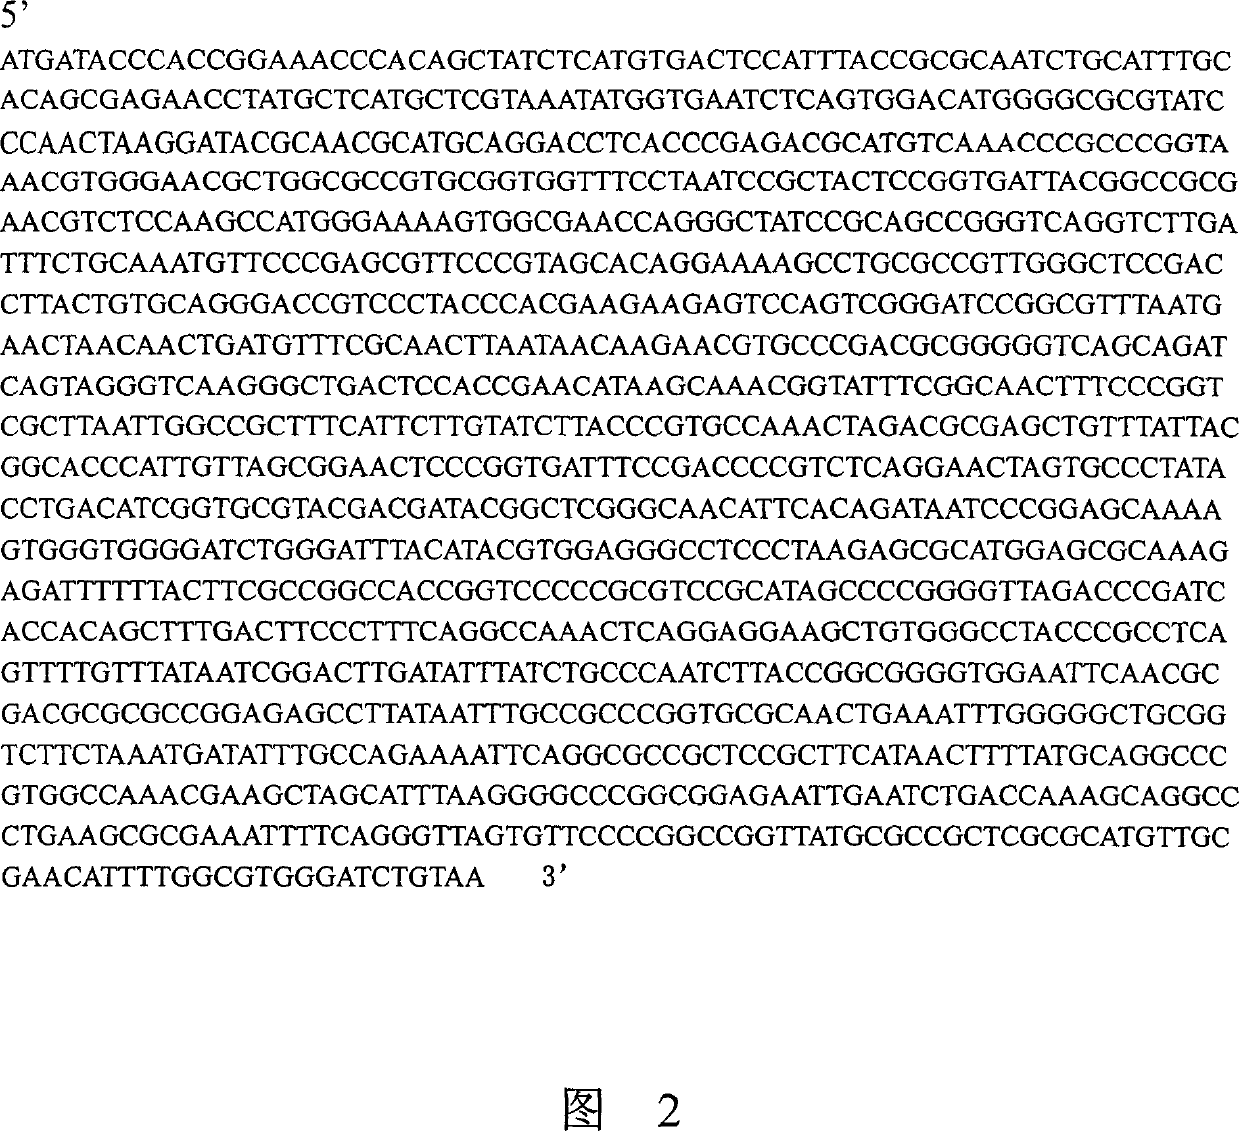 High specific activity phytase gene and its efficient expression